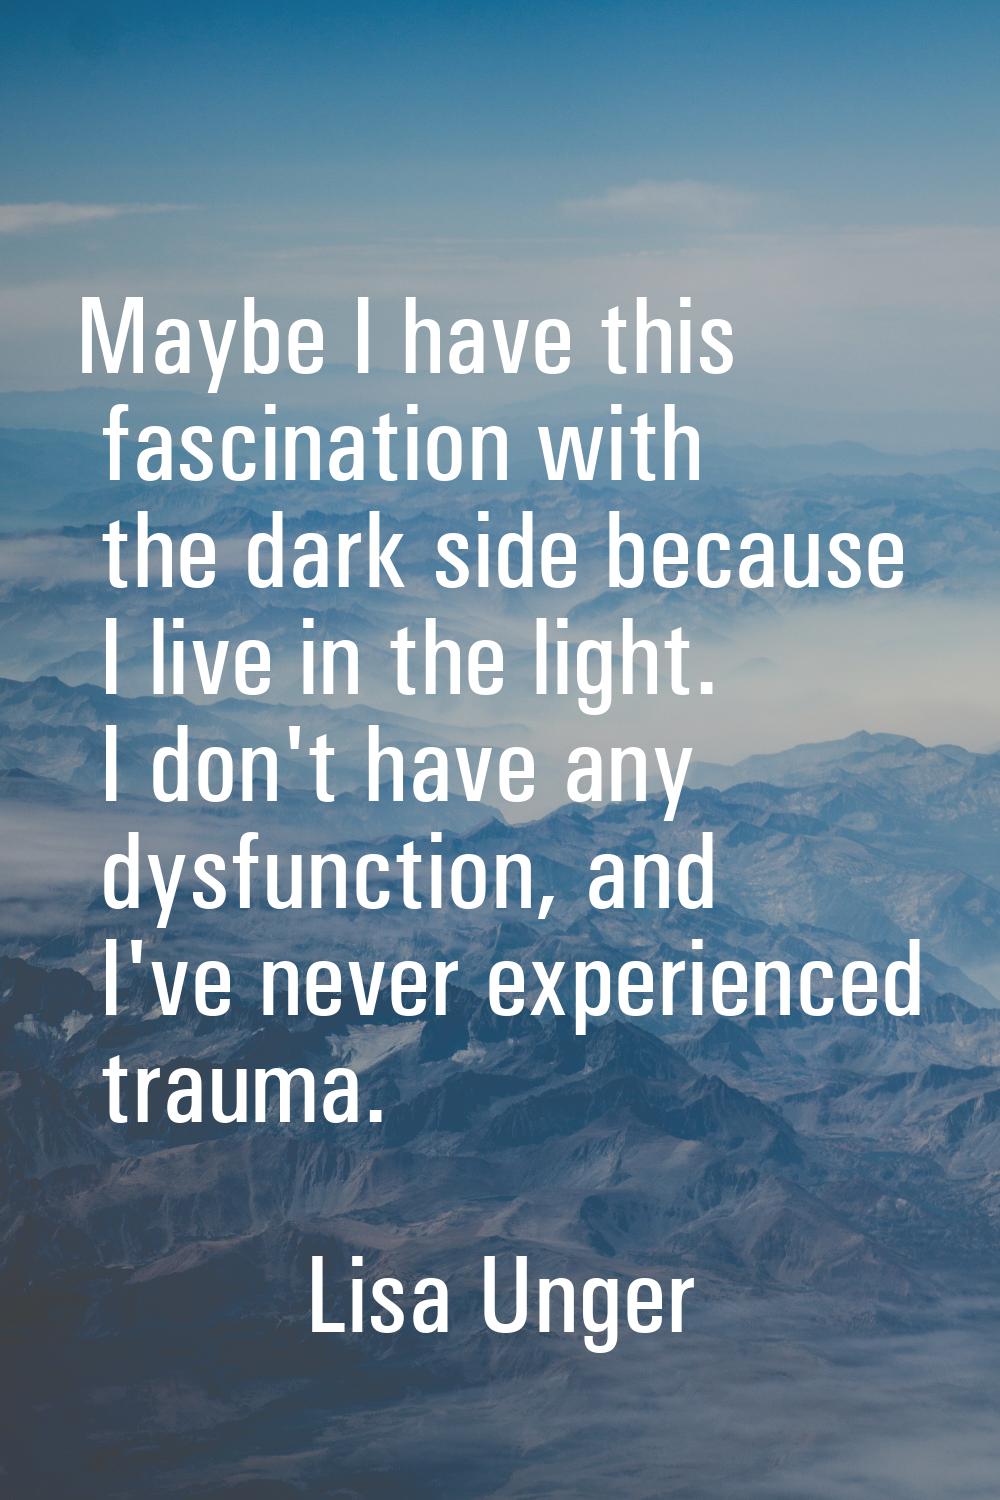 Maybe I have this fascination with the dark side because I live in the light. I don't have any dysf